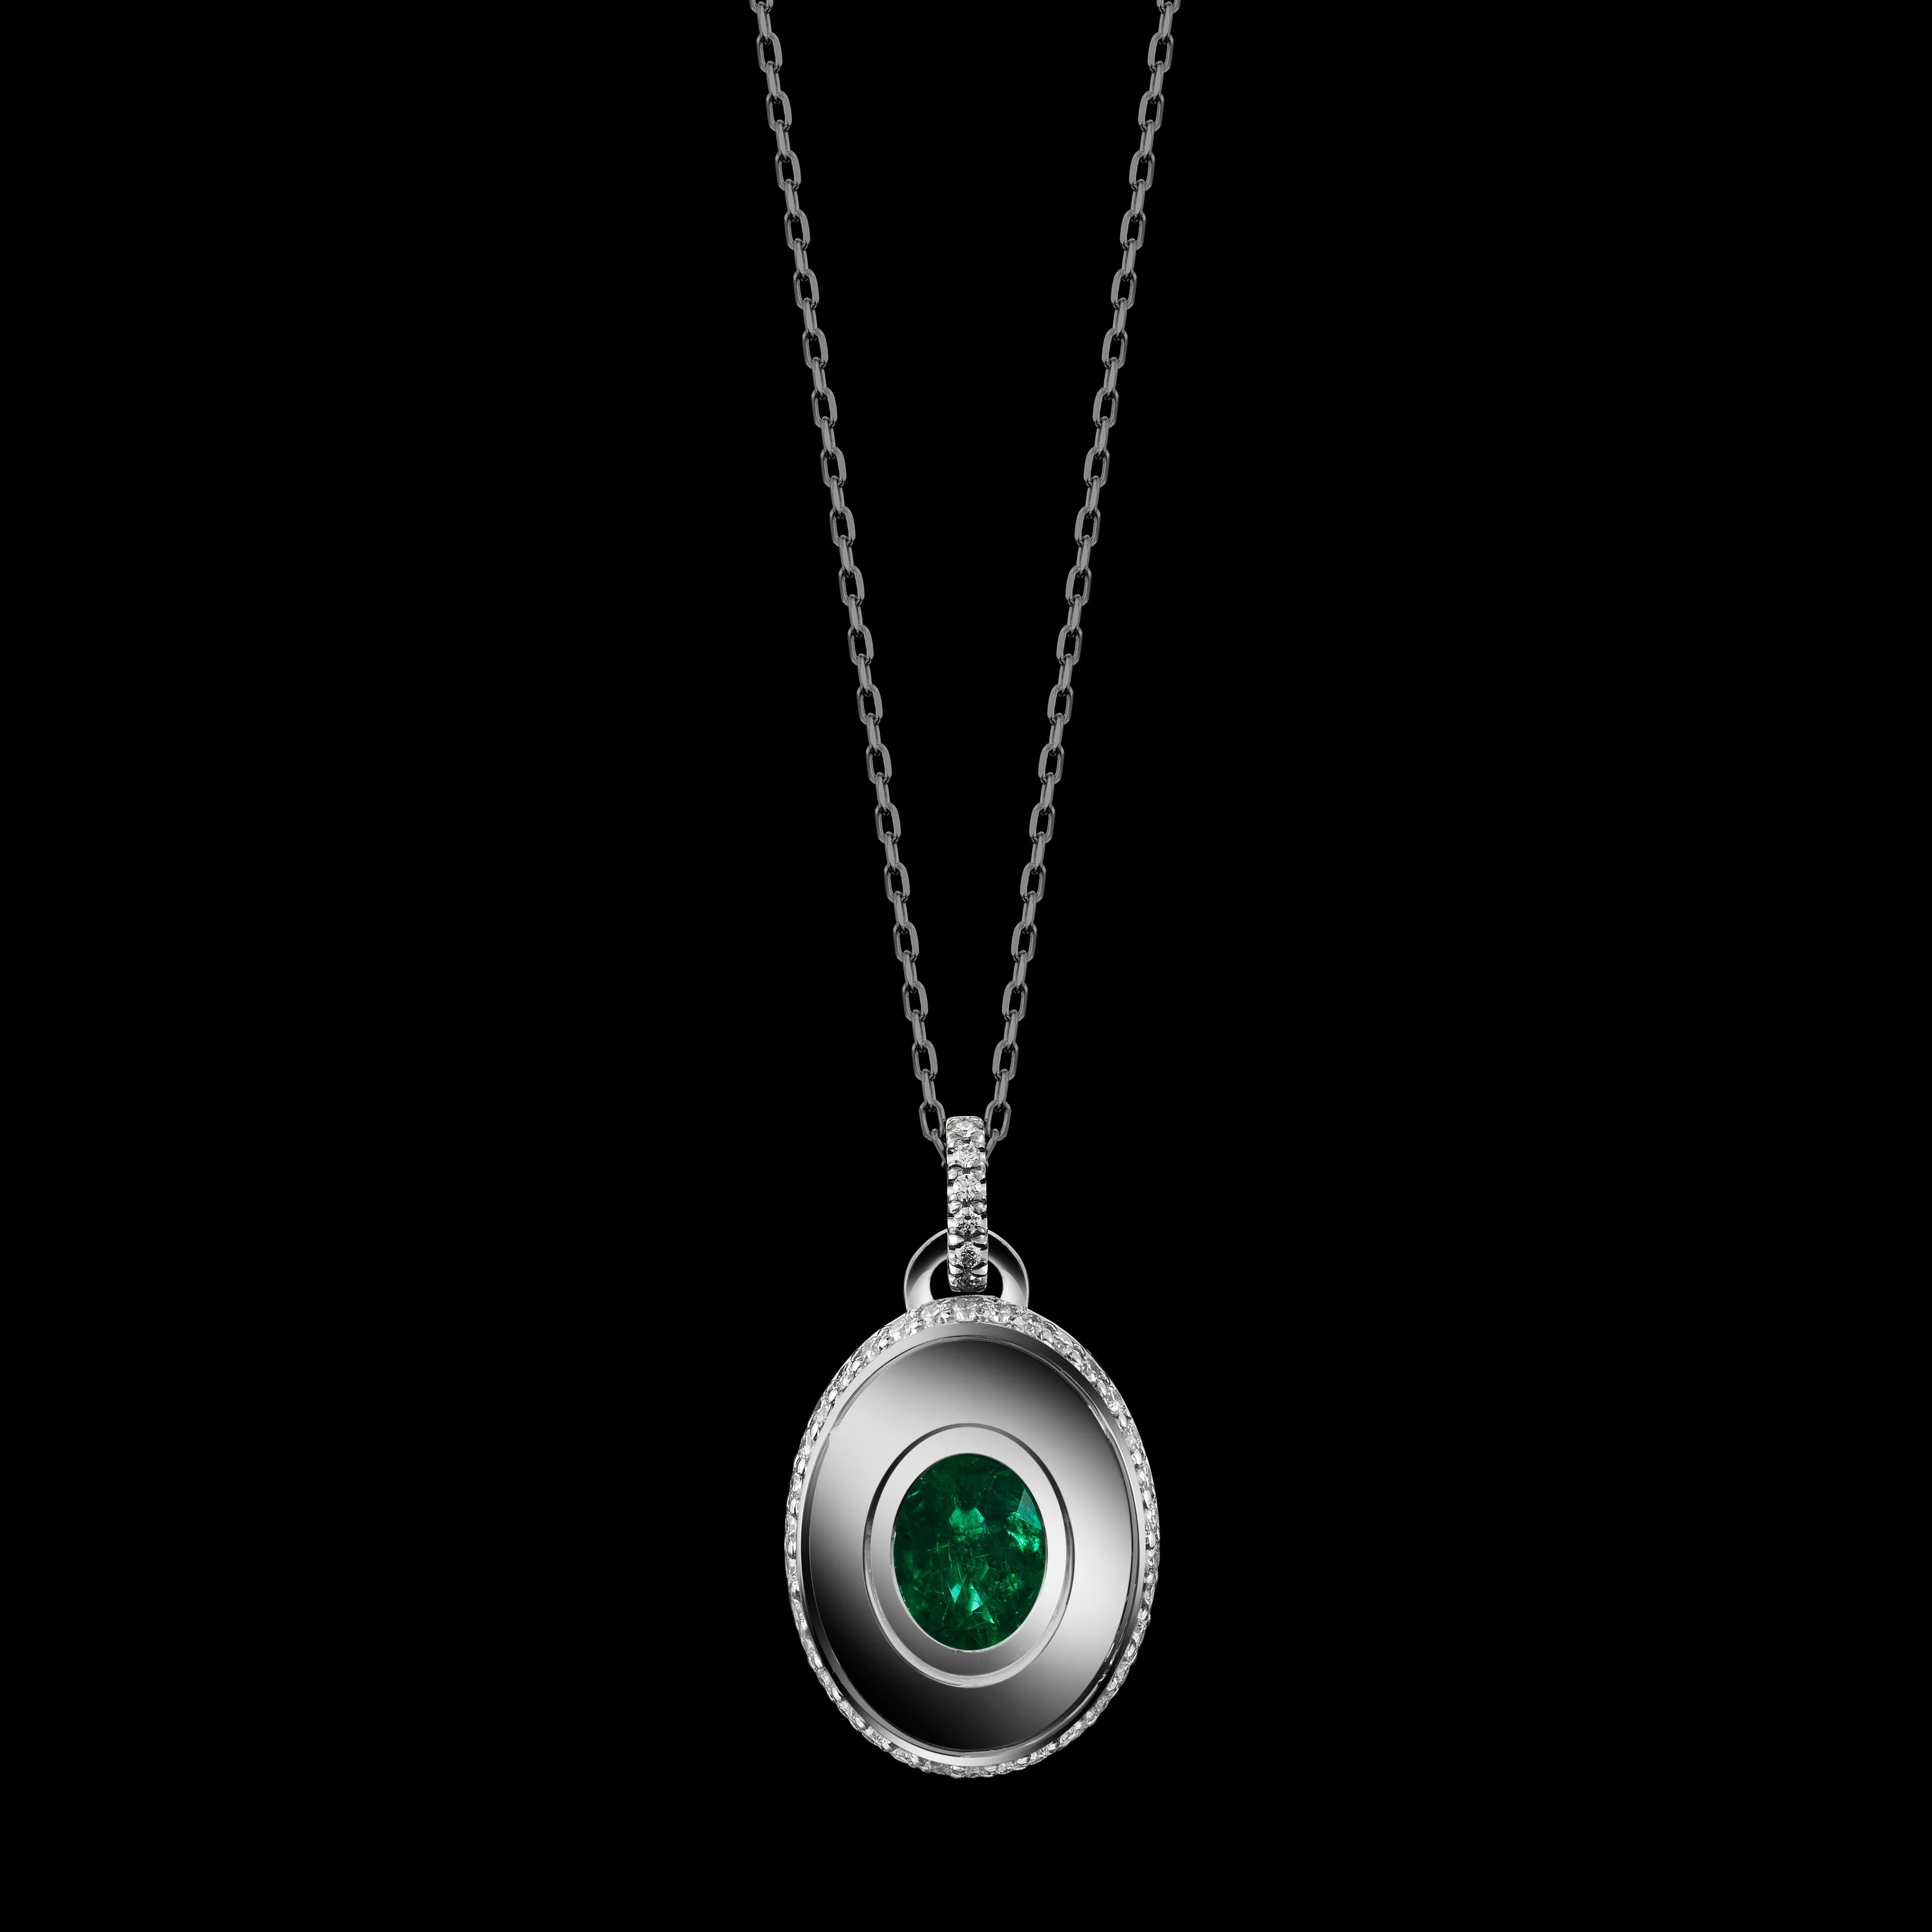 *Please contact us for more information on this piece or on creating your own Alexandra Mor custom Design. 

Alexandra Mor May birthstone charm necklace features an Oval-cut Green Emerald. This charm necklace is set in platinum on 18 karat yellow